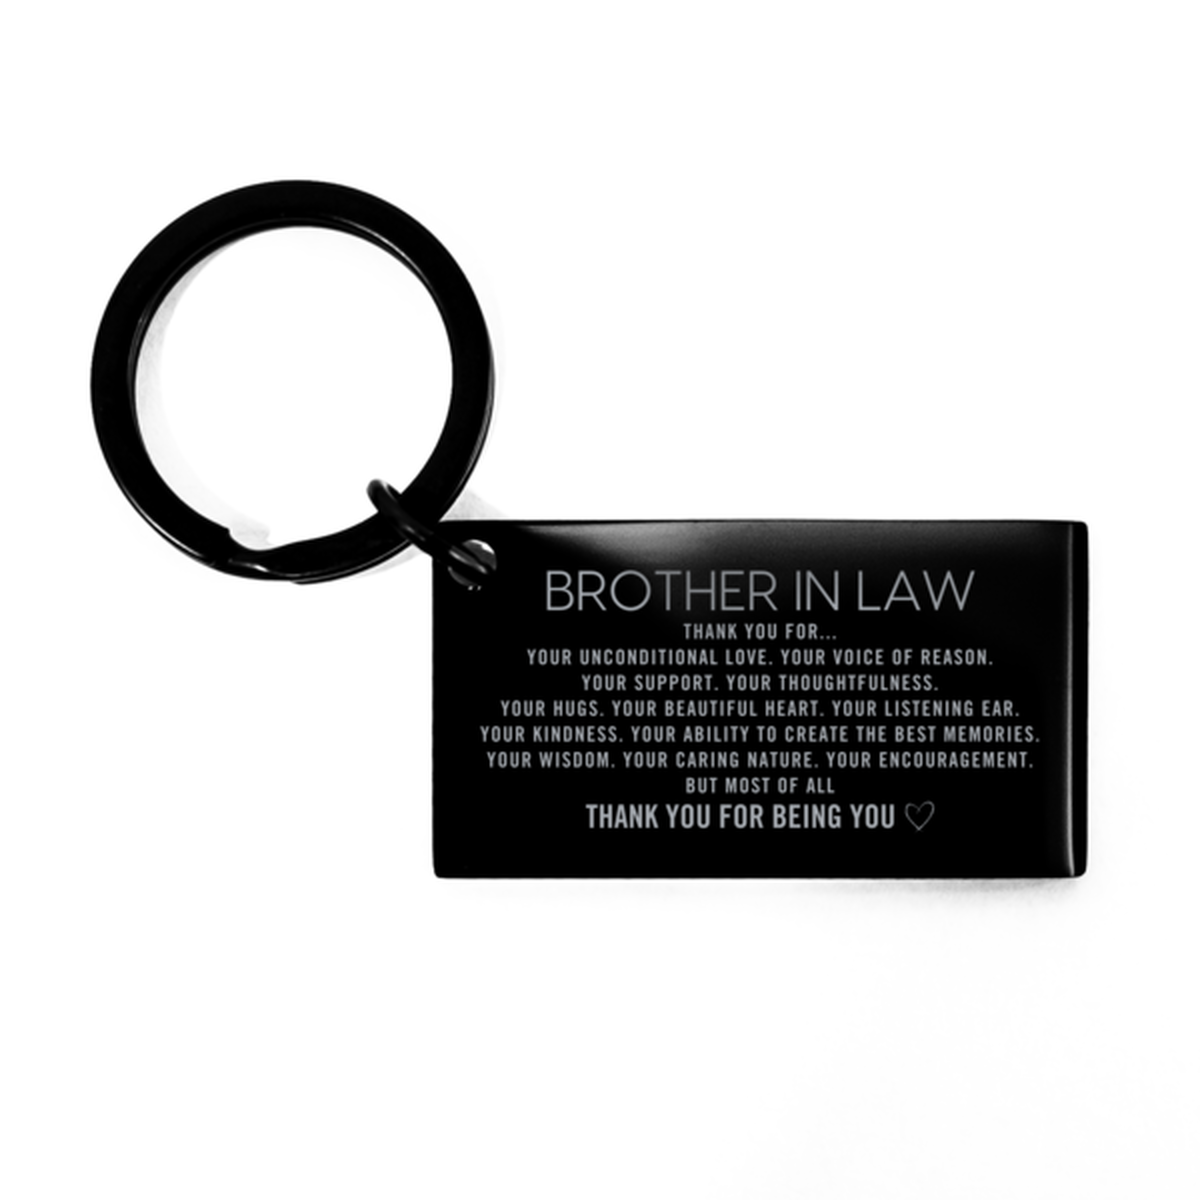 Brother In Law Keychain Custom, Engraved Gifts For Brother In Law Christmas Graduation Birthday Gifts for Men Women Brother In Law Thank you for Your unconditional love